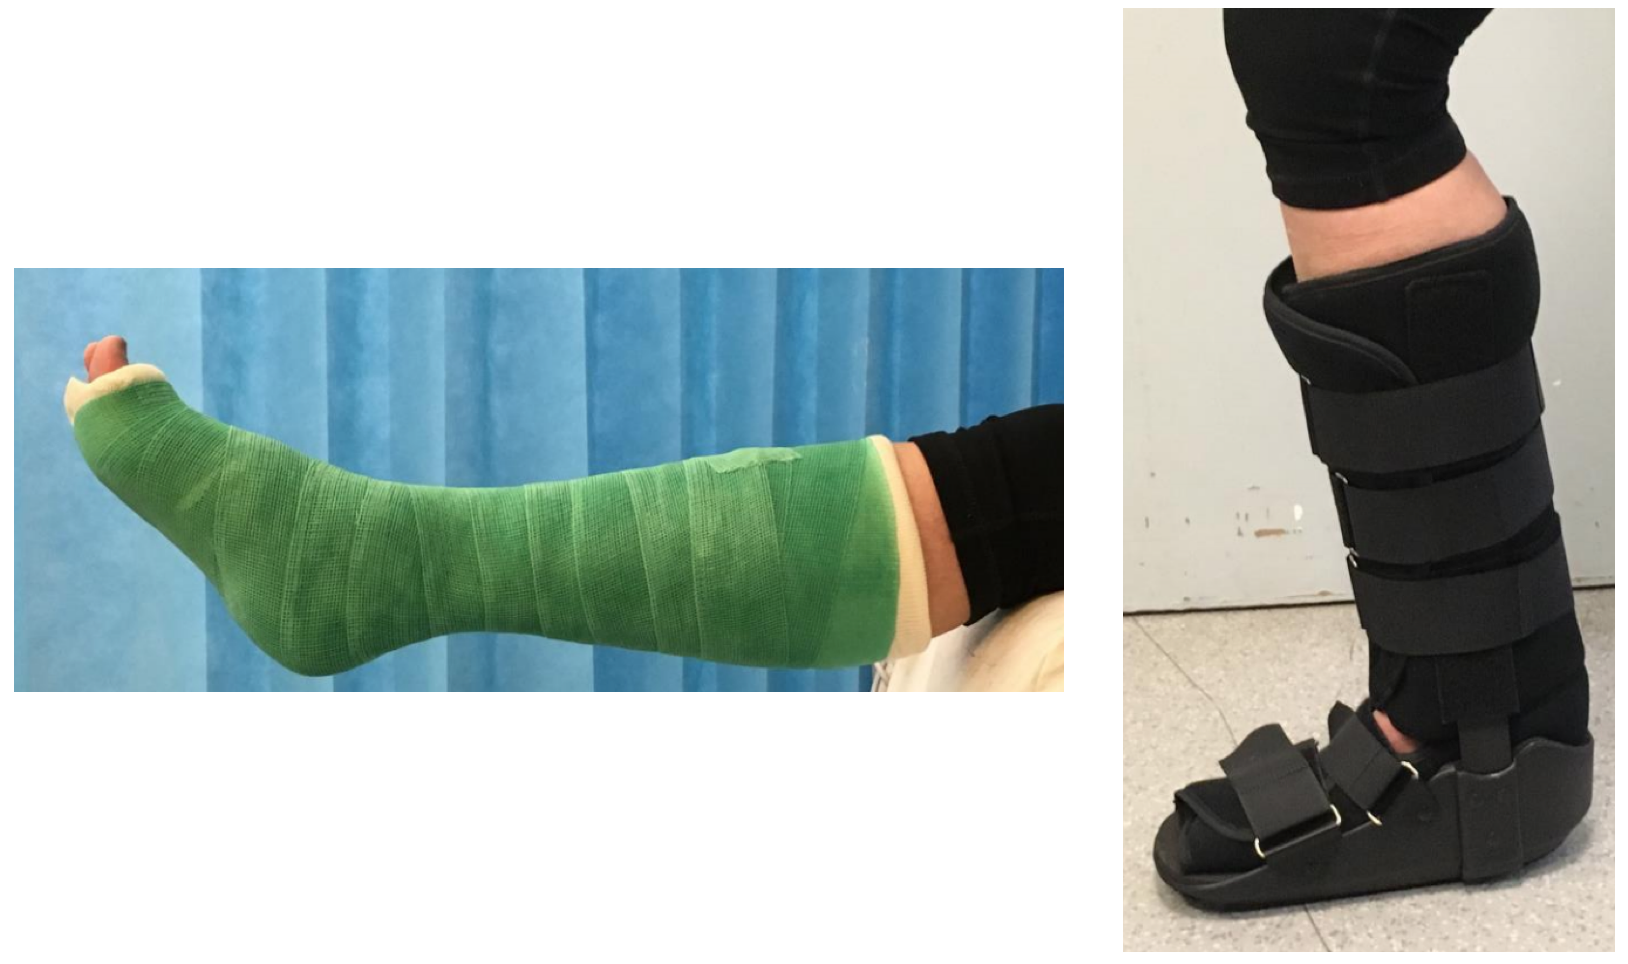 Cast or Walking Boot for Achilles Tendon Rupture? — JournalFeed